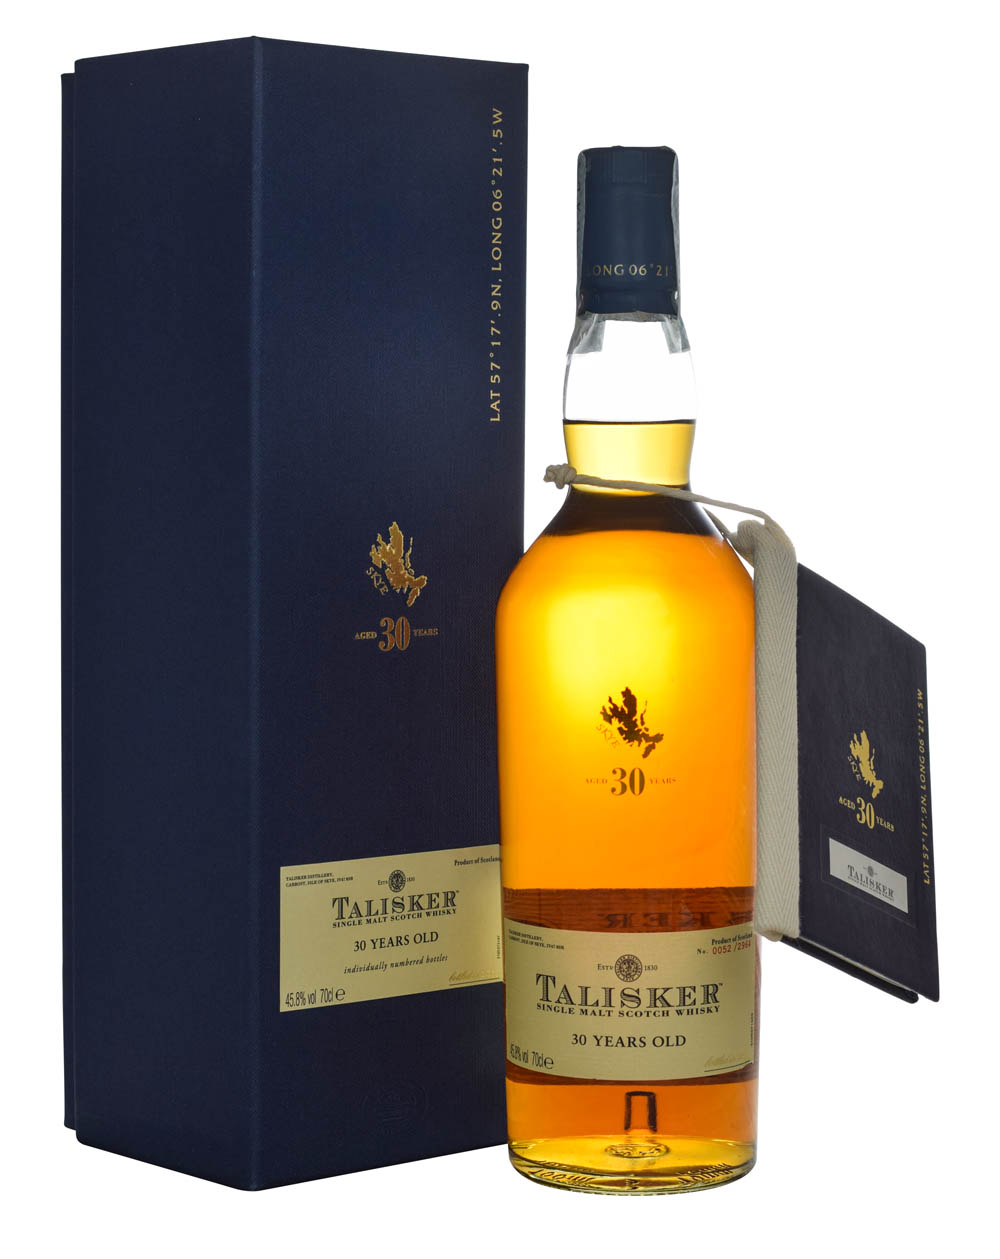 Talisker 30 Years Old 2011 Box Musthave Malts MHM